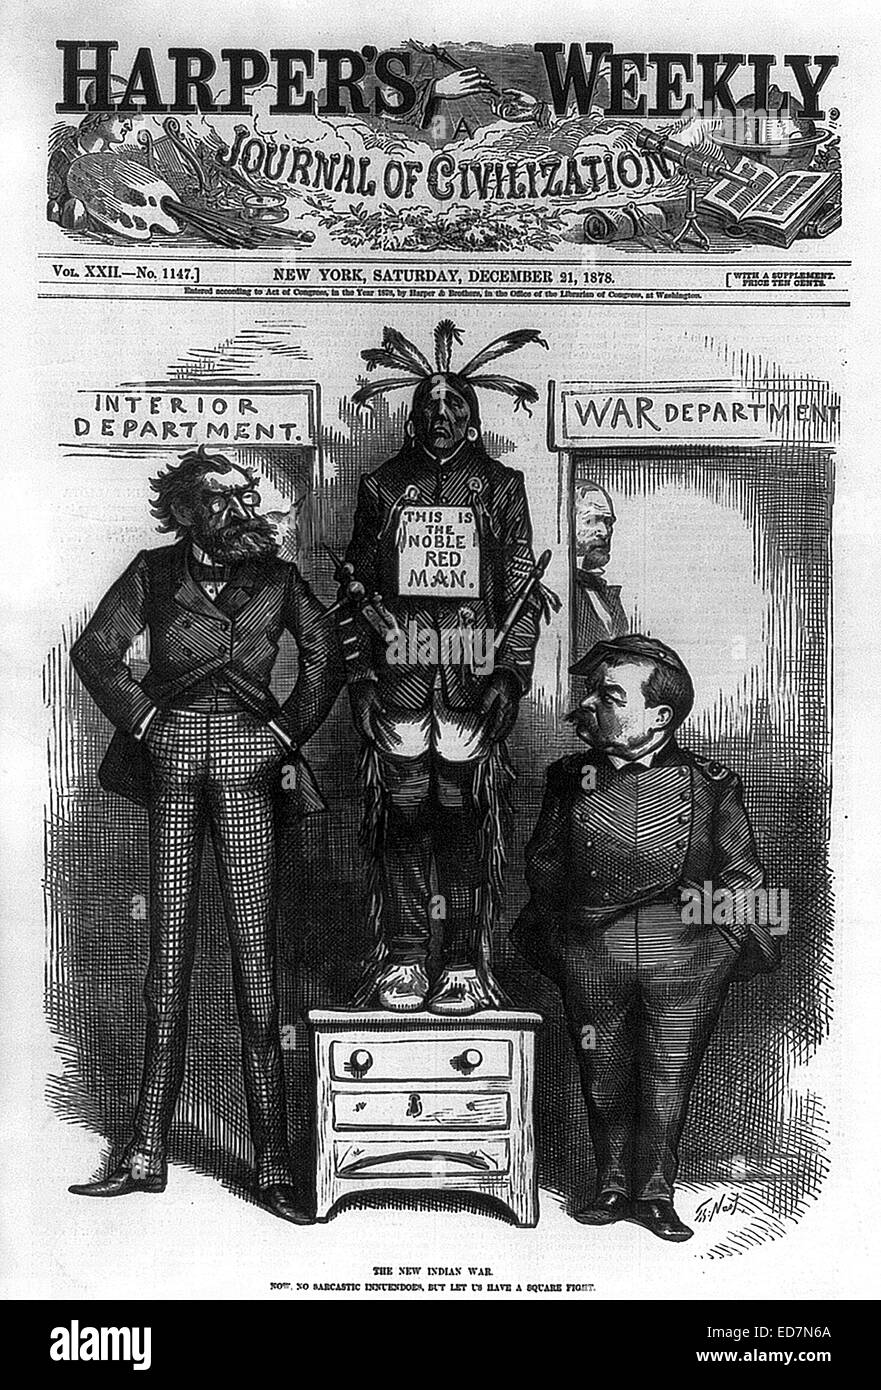 'The new Indian war. Now, no sarcastic innuendoes, but let us have a square fight' cartoon by Thomas Nast. Dec 21, 1878 featured on the cover of Harper's Weekly Stock Photo